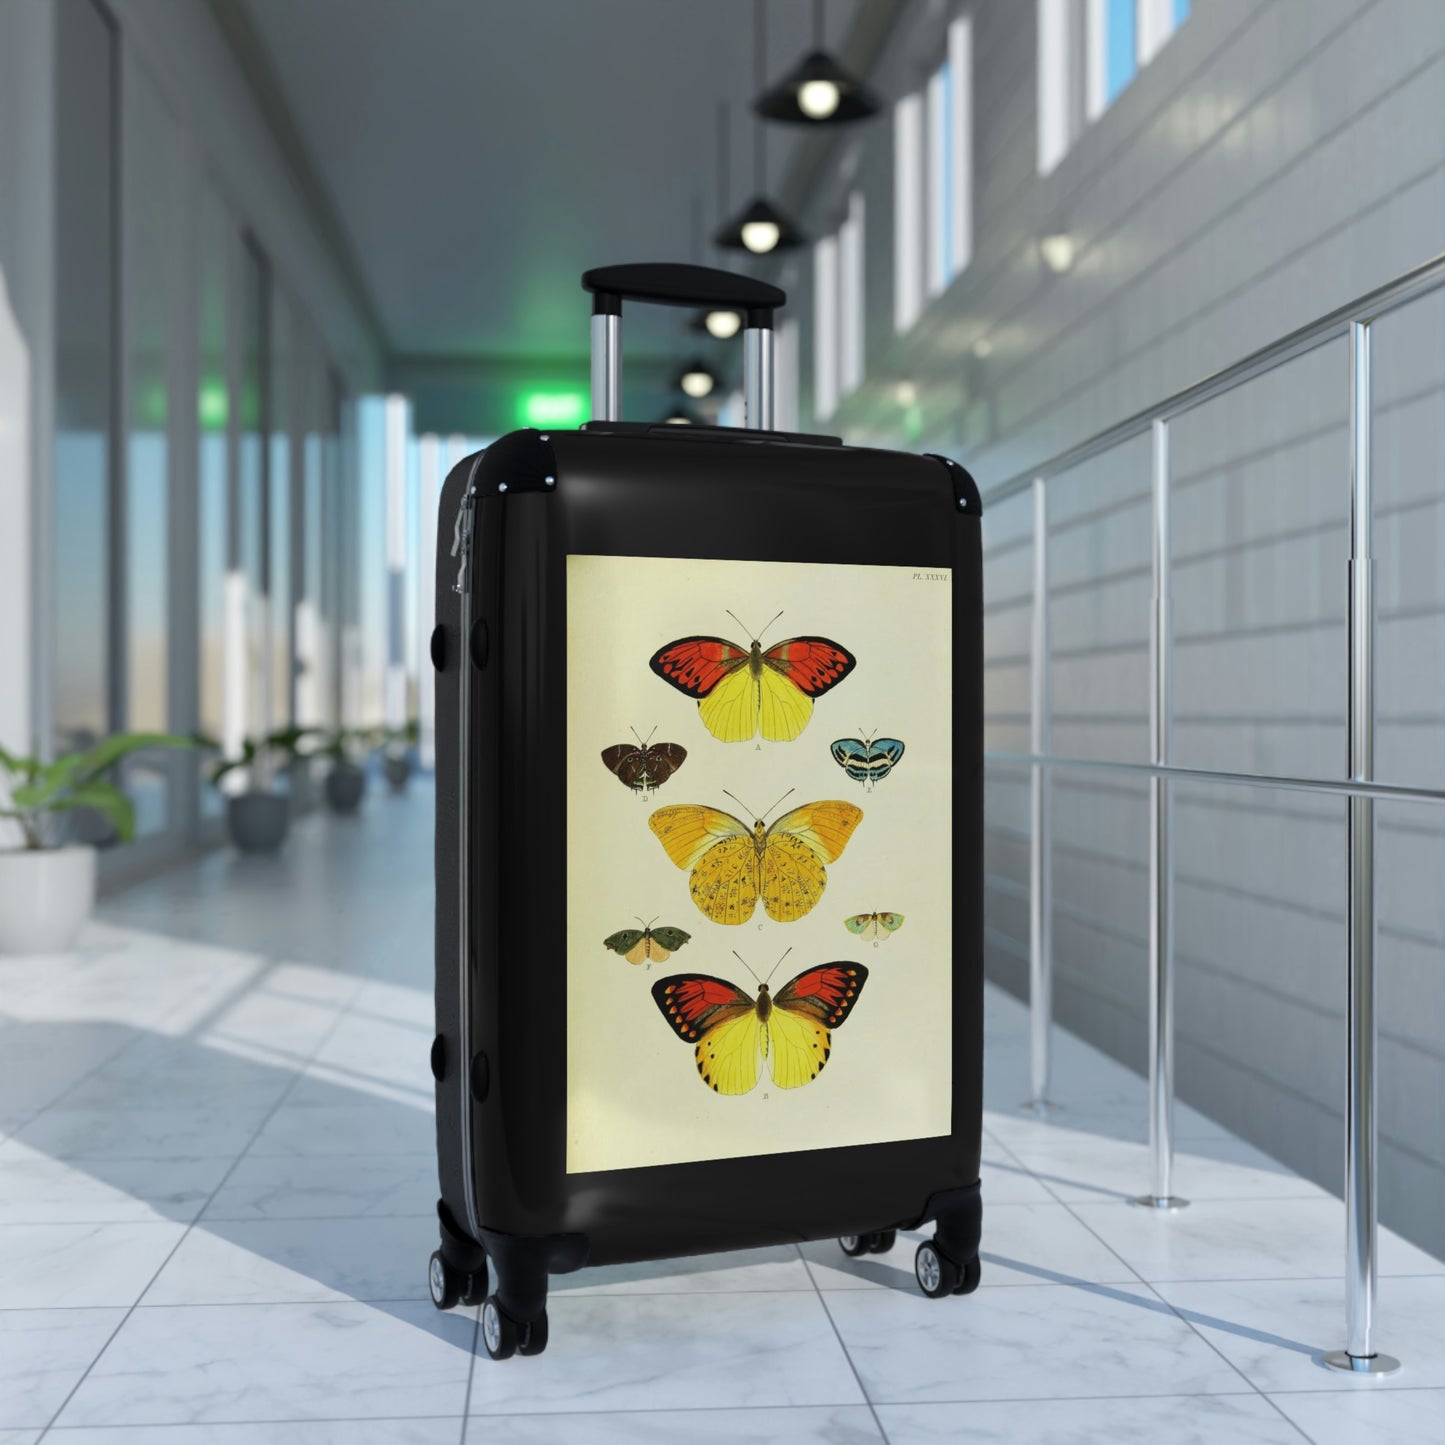 Getrott Butterflies Black Red Yellow Cabin Suitcase Rolling Luggage Extended Storage Adjustable Telescopic Handle Double wheeled Polycarbonate Hard-shell Built-in Lock-Bags-Geotrott